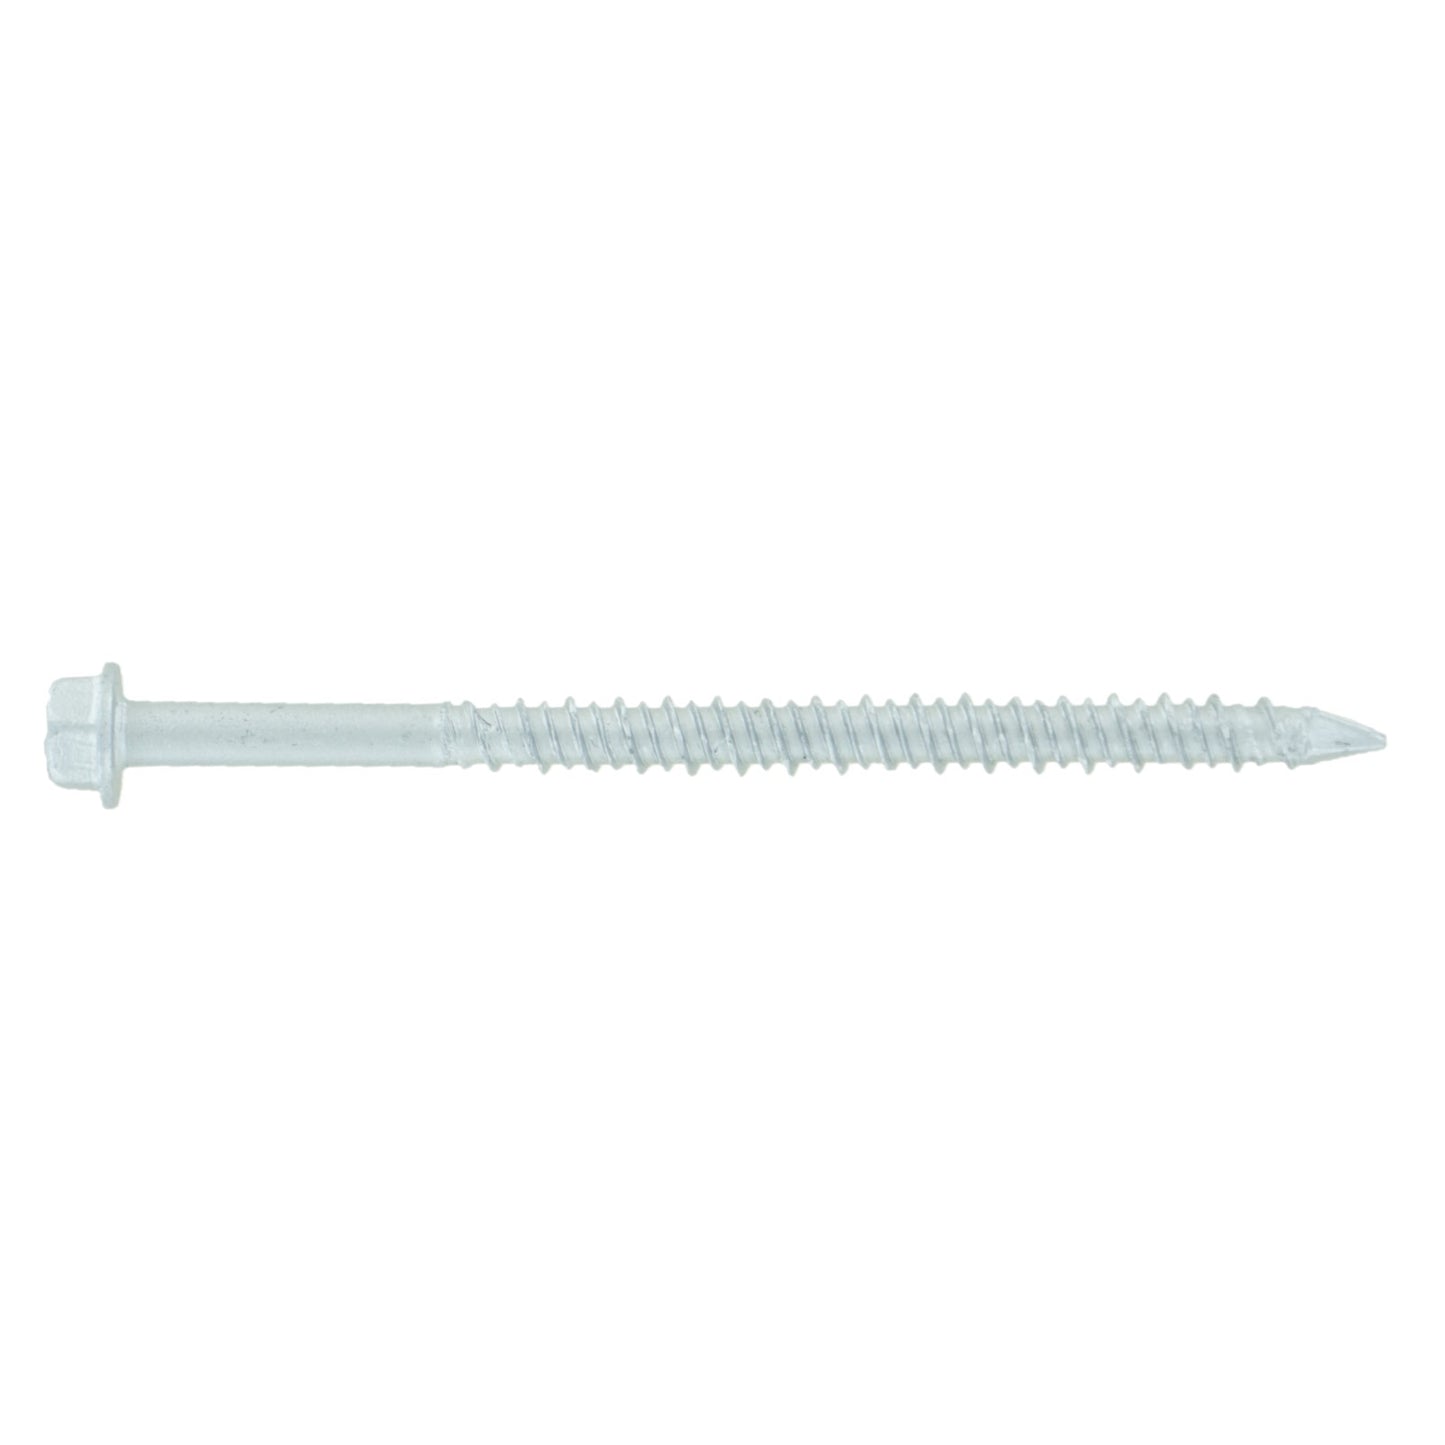 14 inch x 334 inch Fasteners Plus Hex Concrete Screw 410 Stainless Steel Pkg 100 image 1 of 2